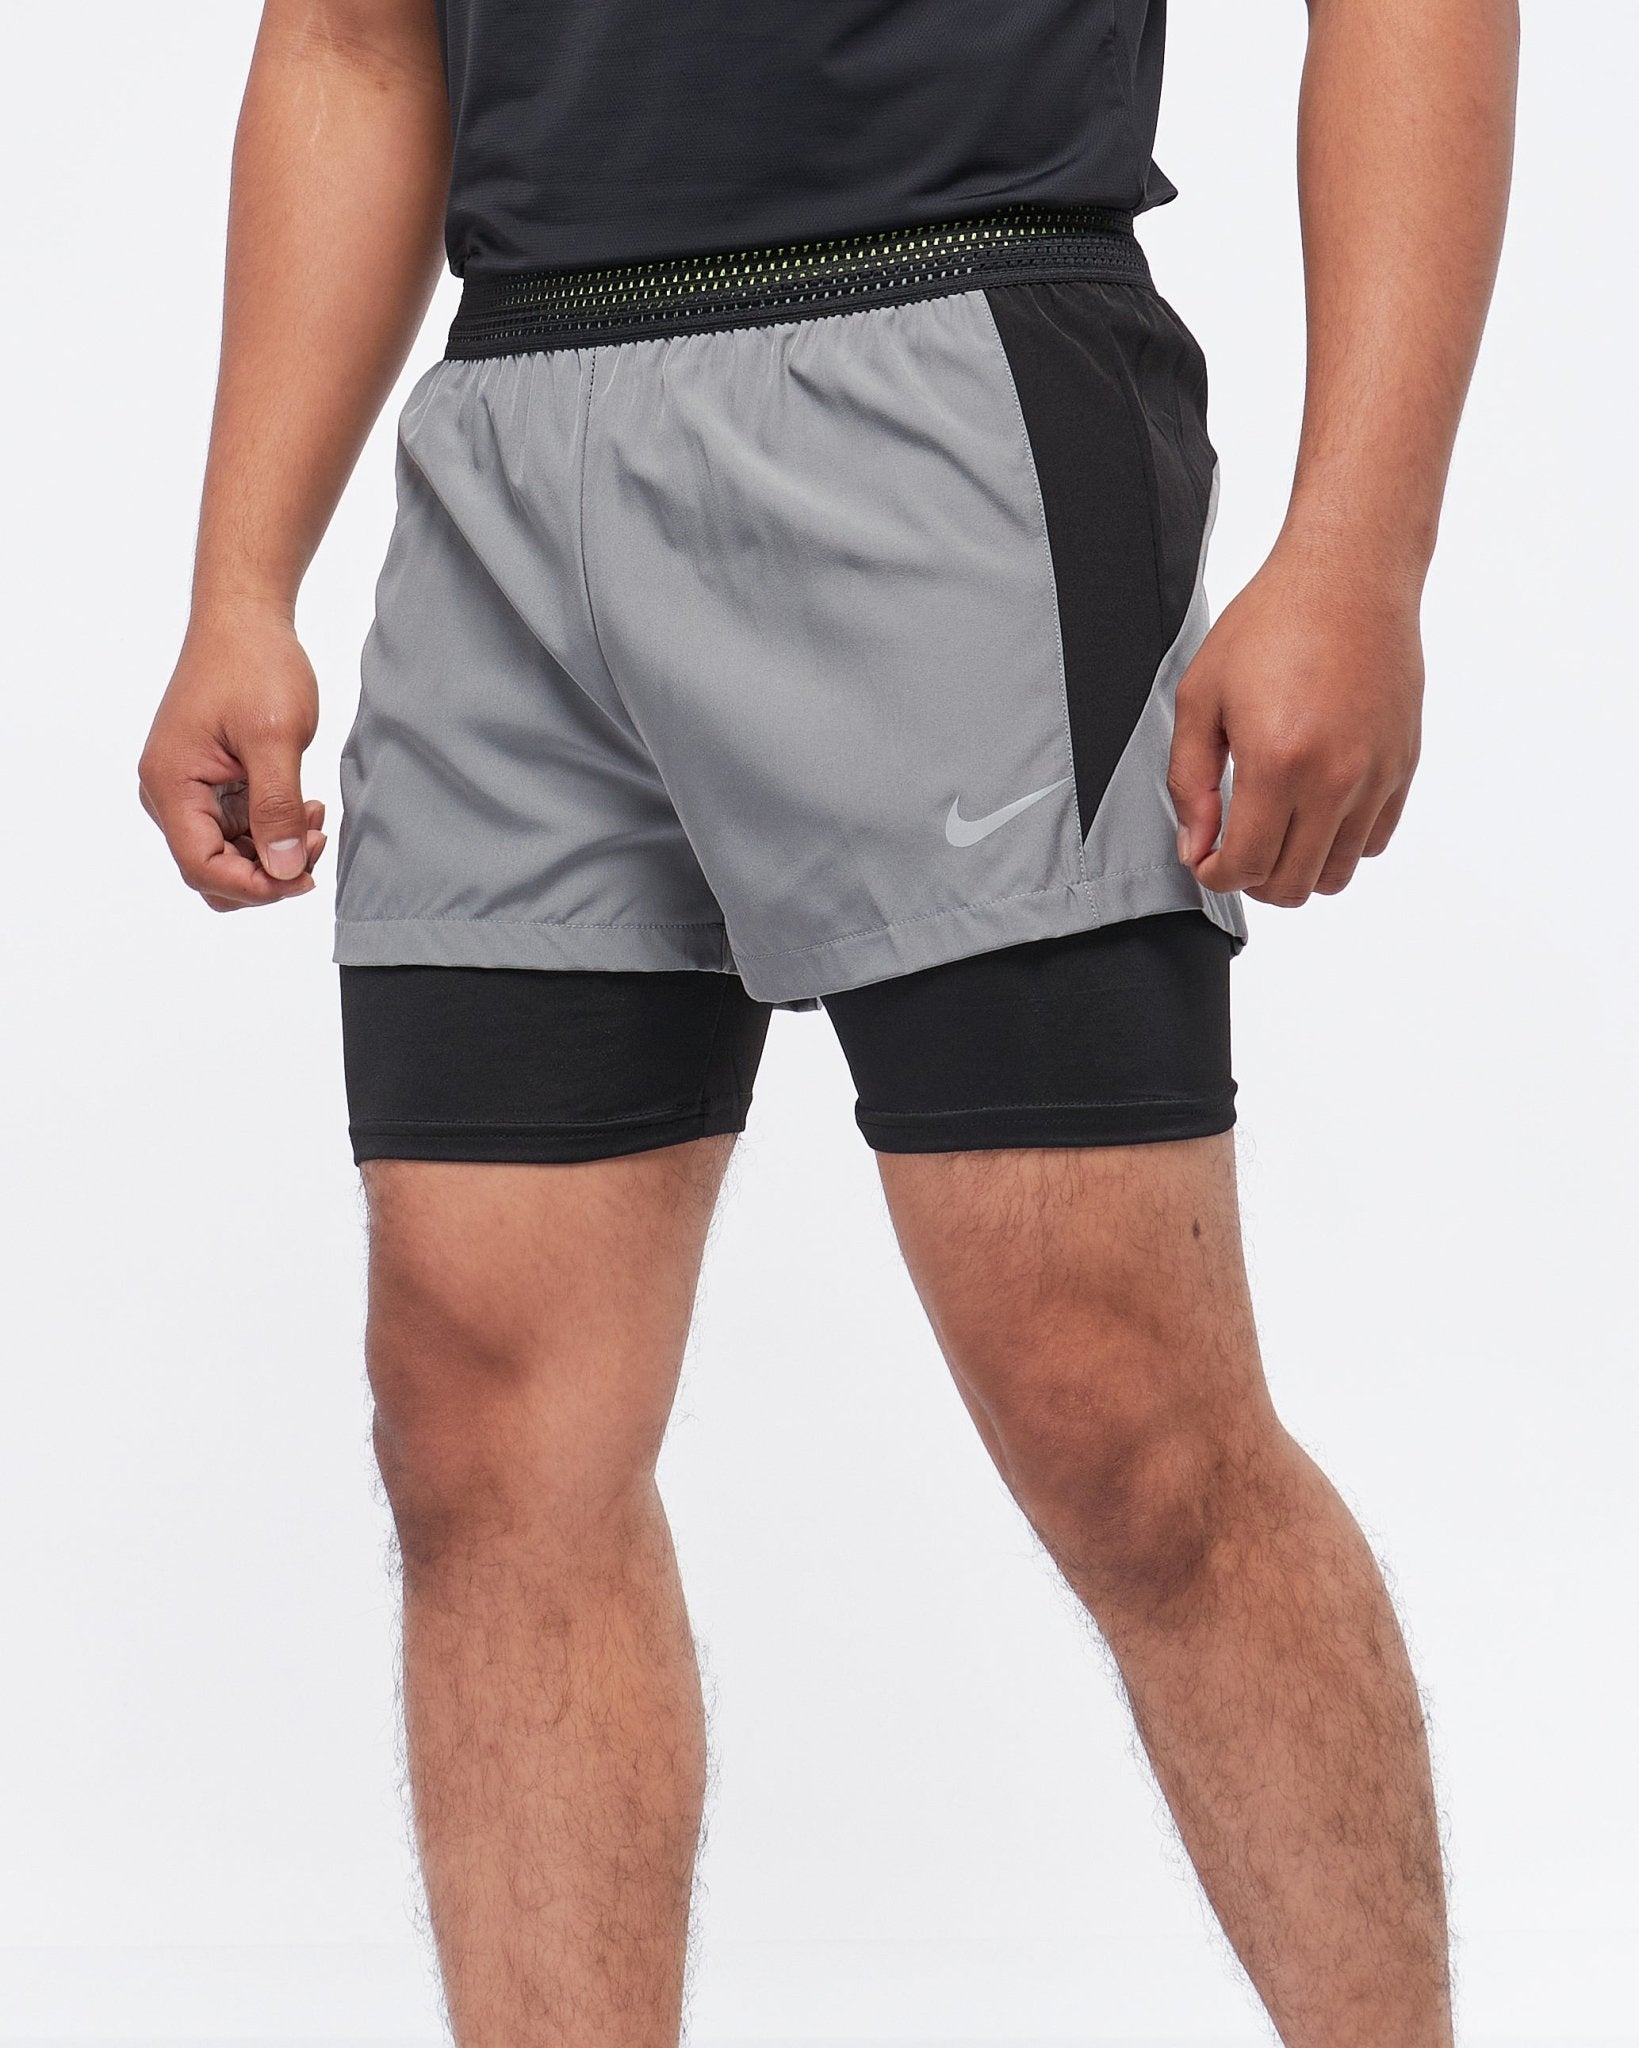 MOI OUTFIT-Color Block 2 in 1 Men Sport Shorts 13.90